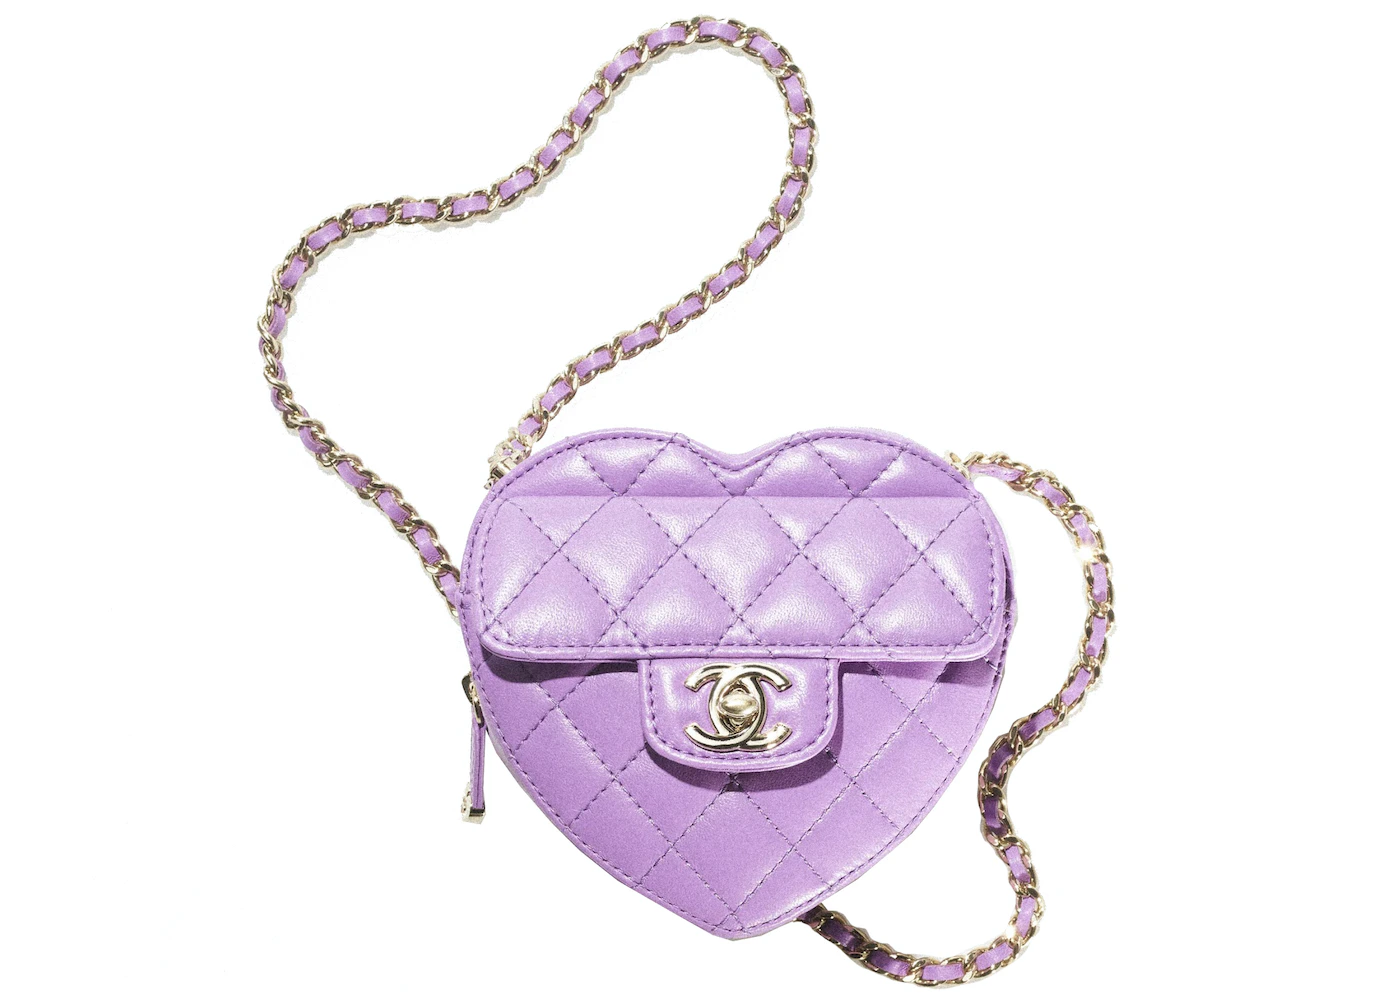 The only 💗 we need right now is this Chanel Heart Clutch Bag in